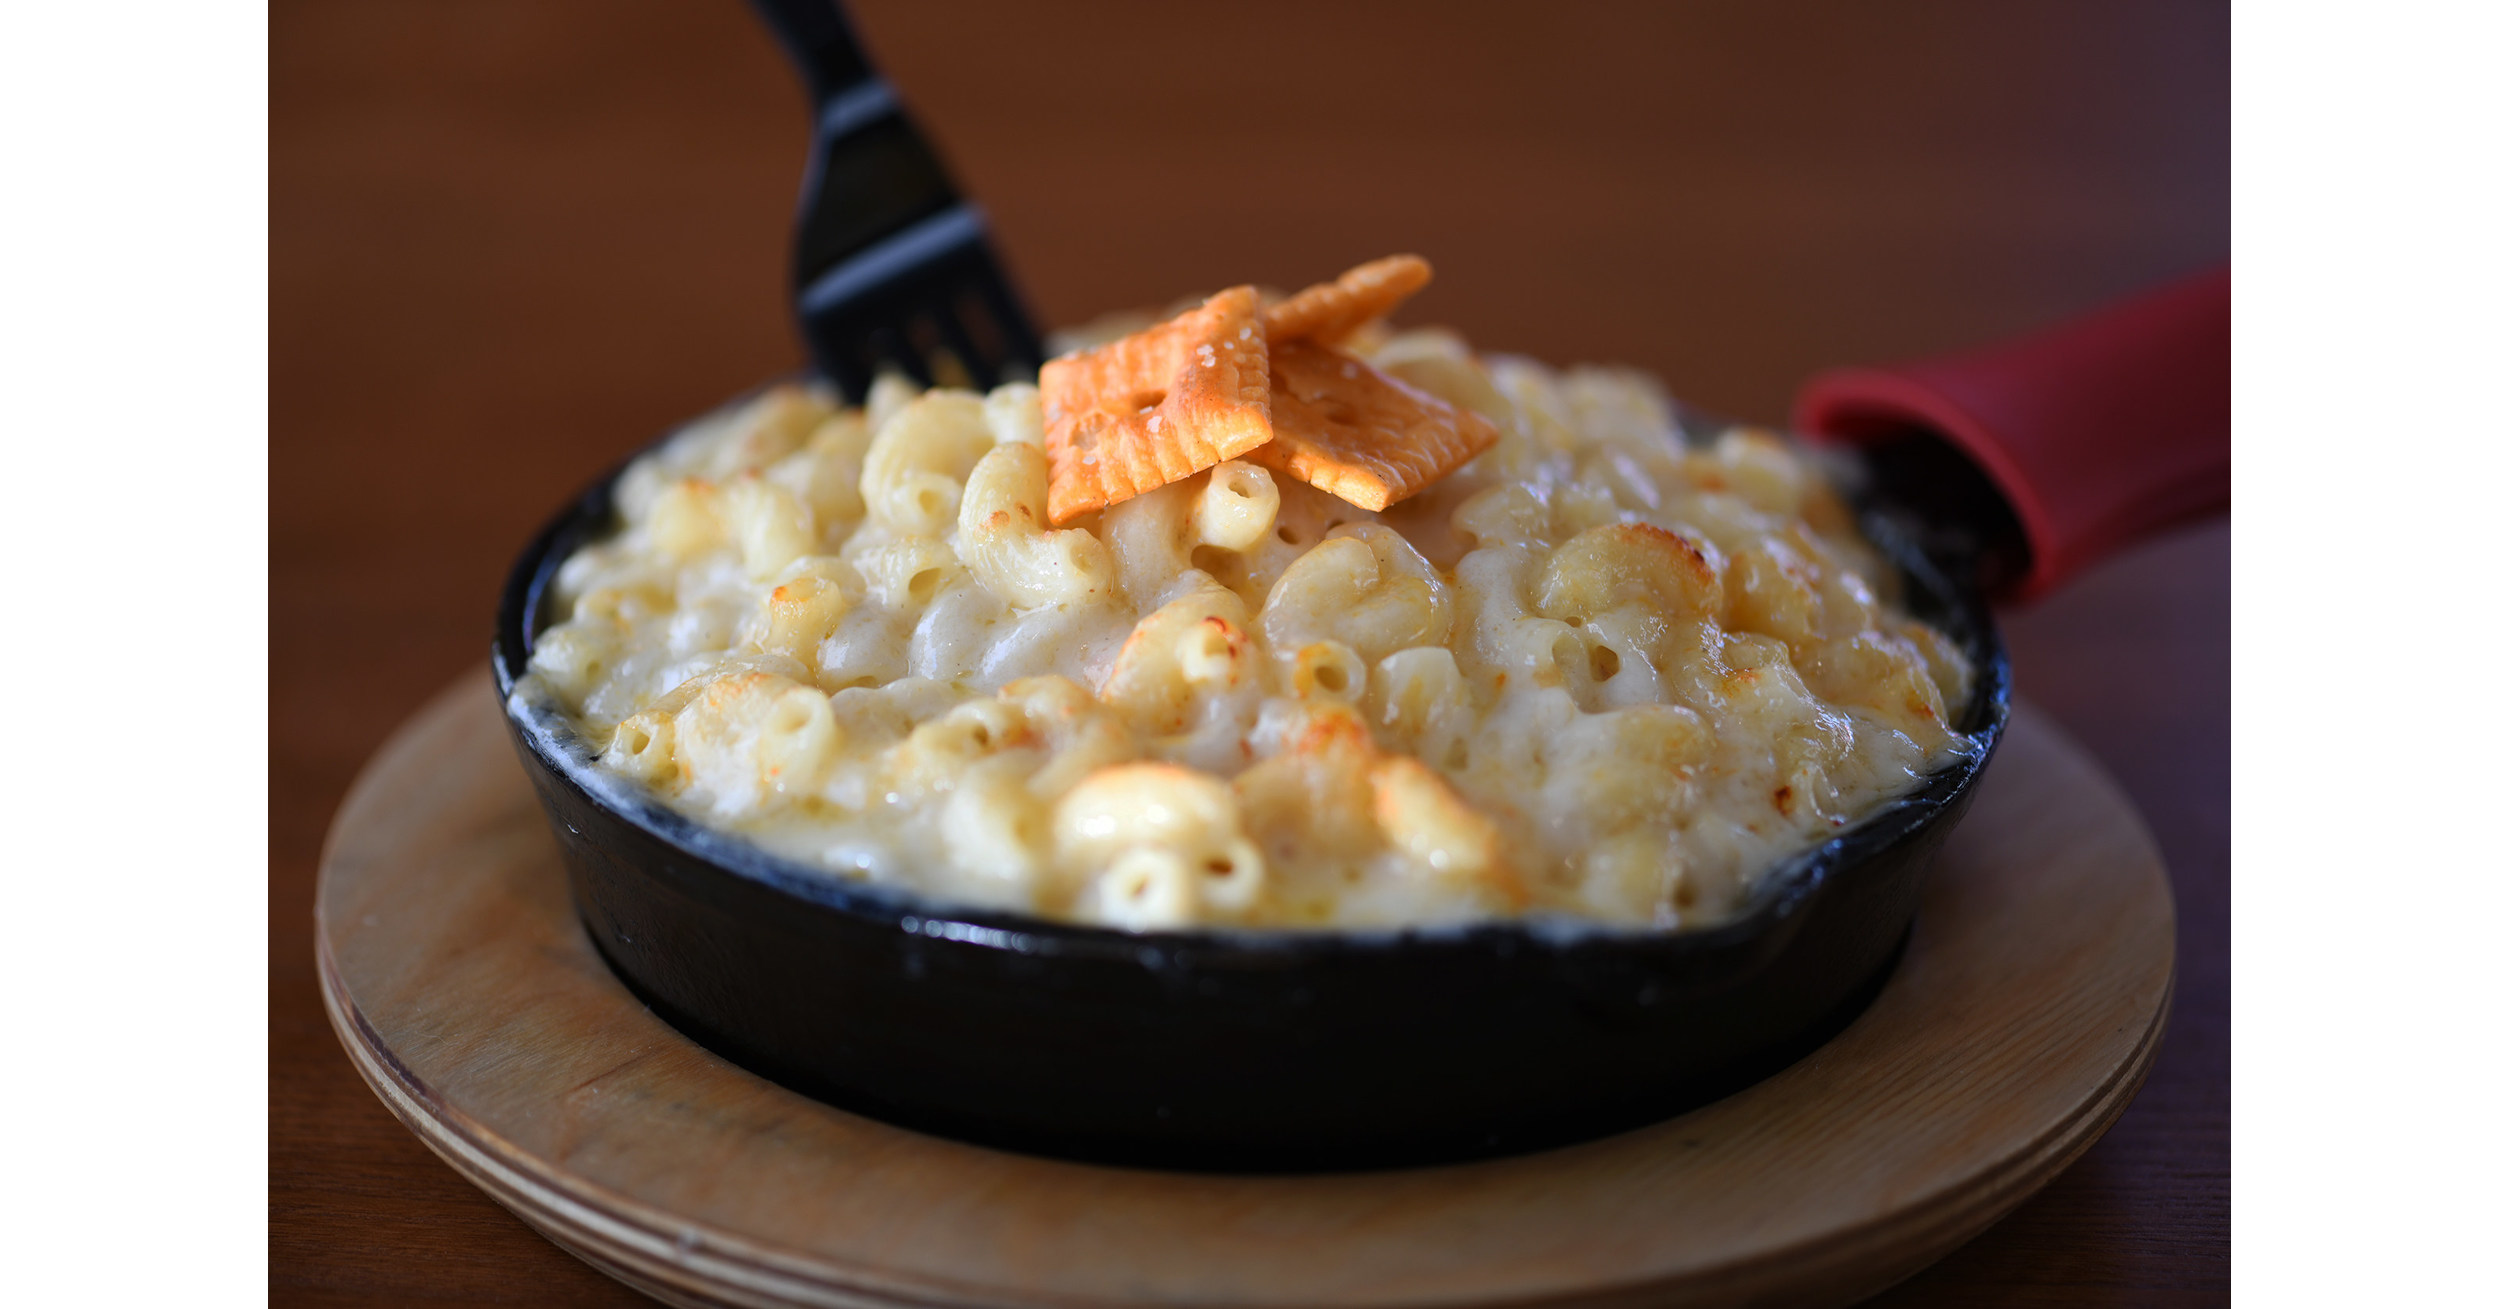 A chain of three Mac & Cheese restaurants will be relaunching with new ...